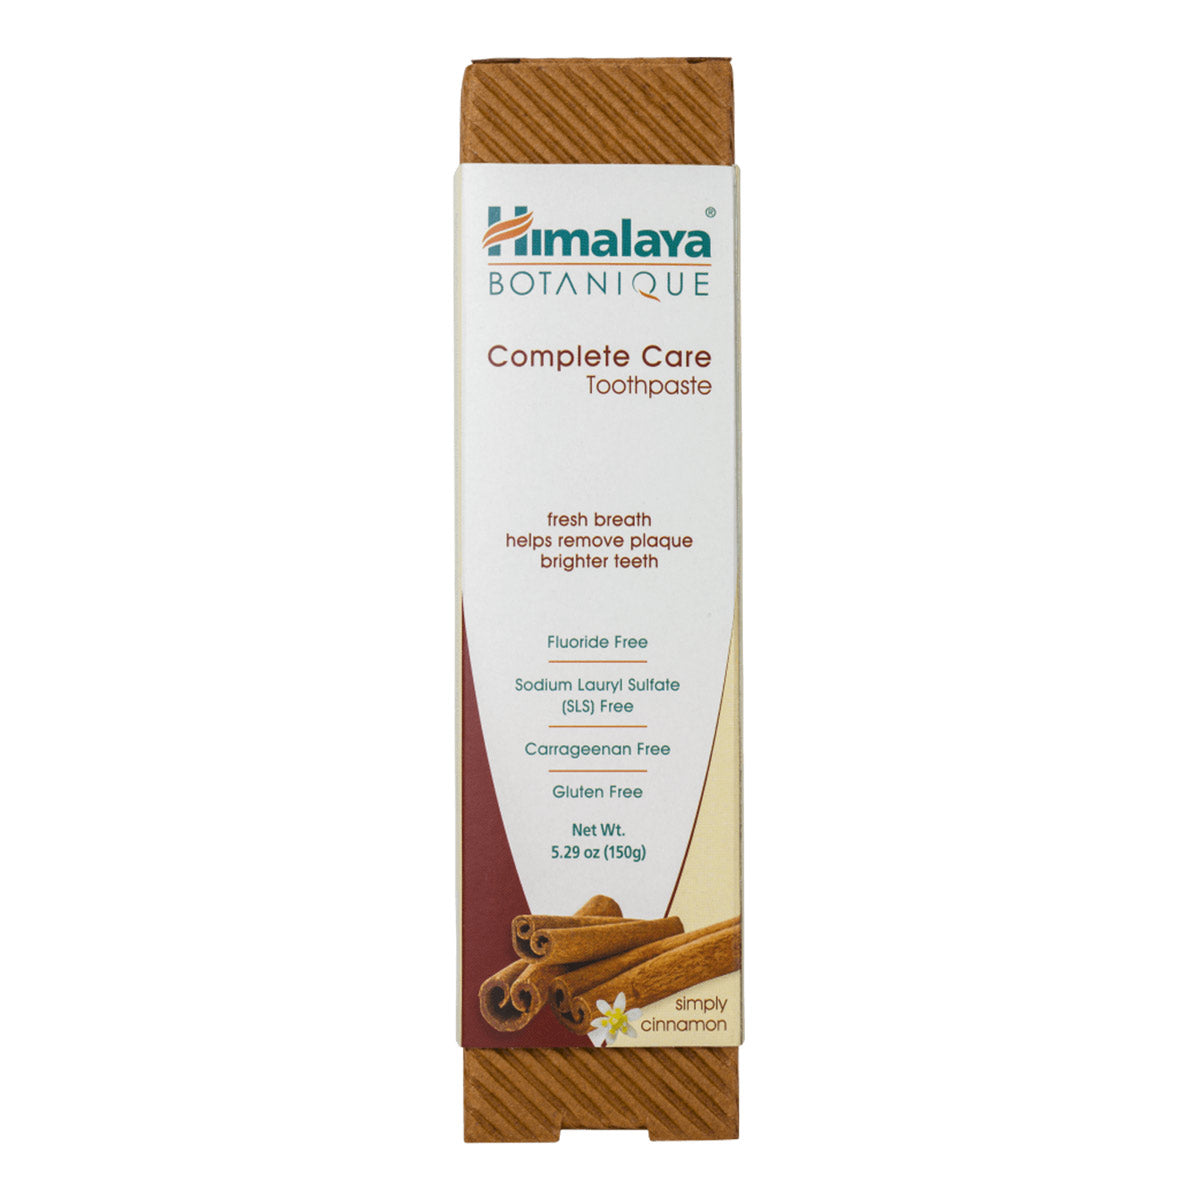 Alternate image of Complete Care Simply Cinnamon Toothpaste